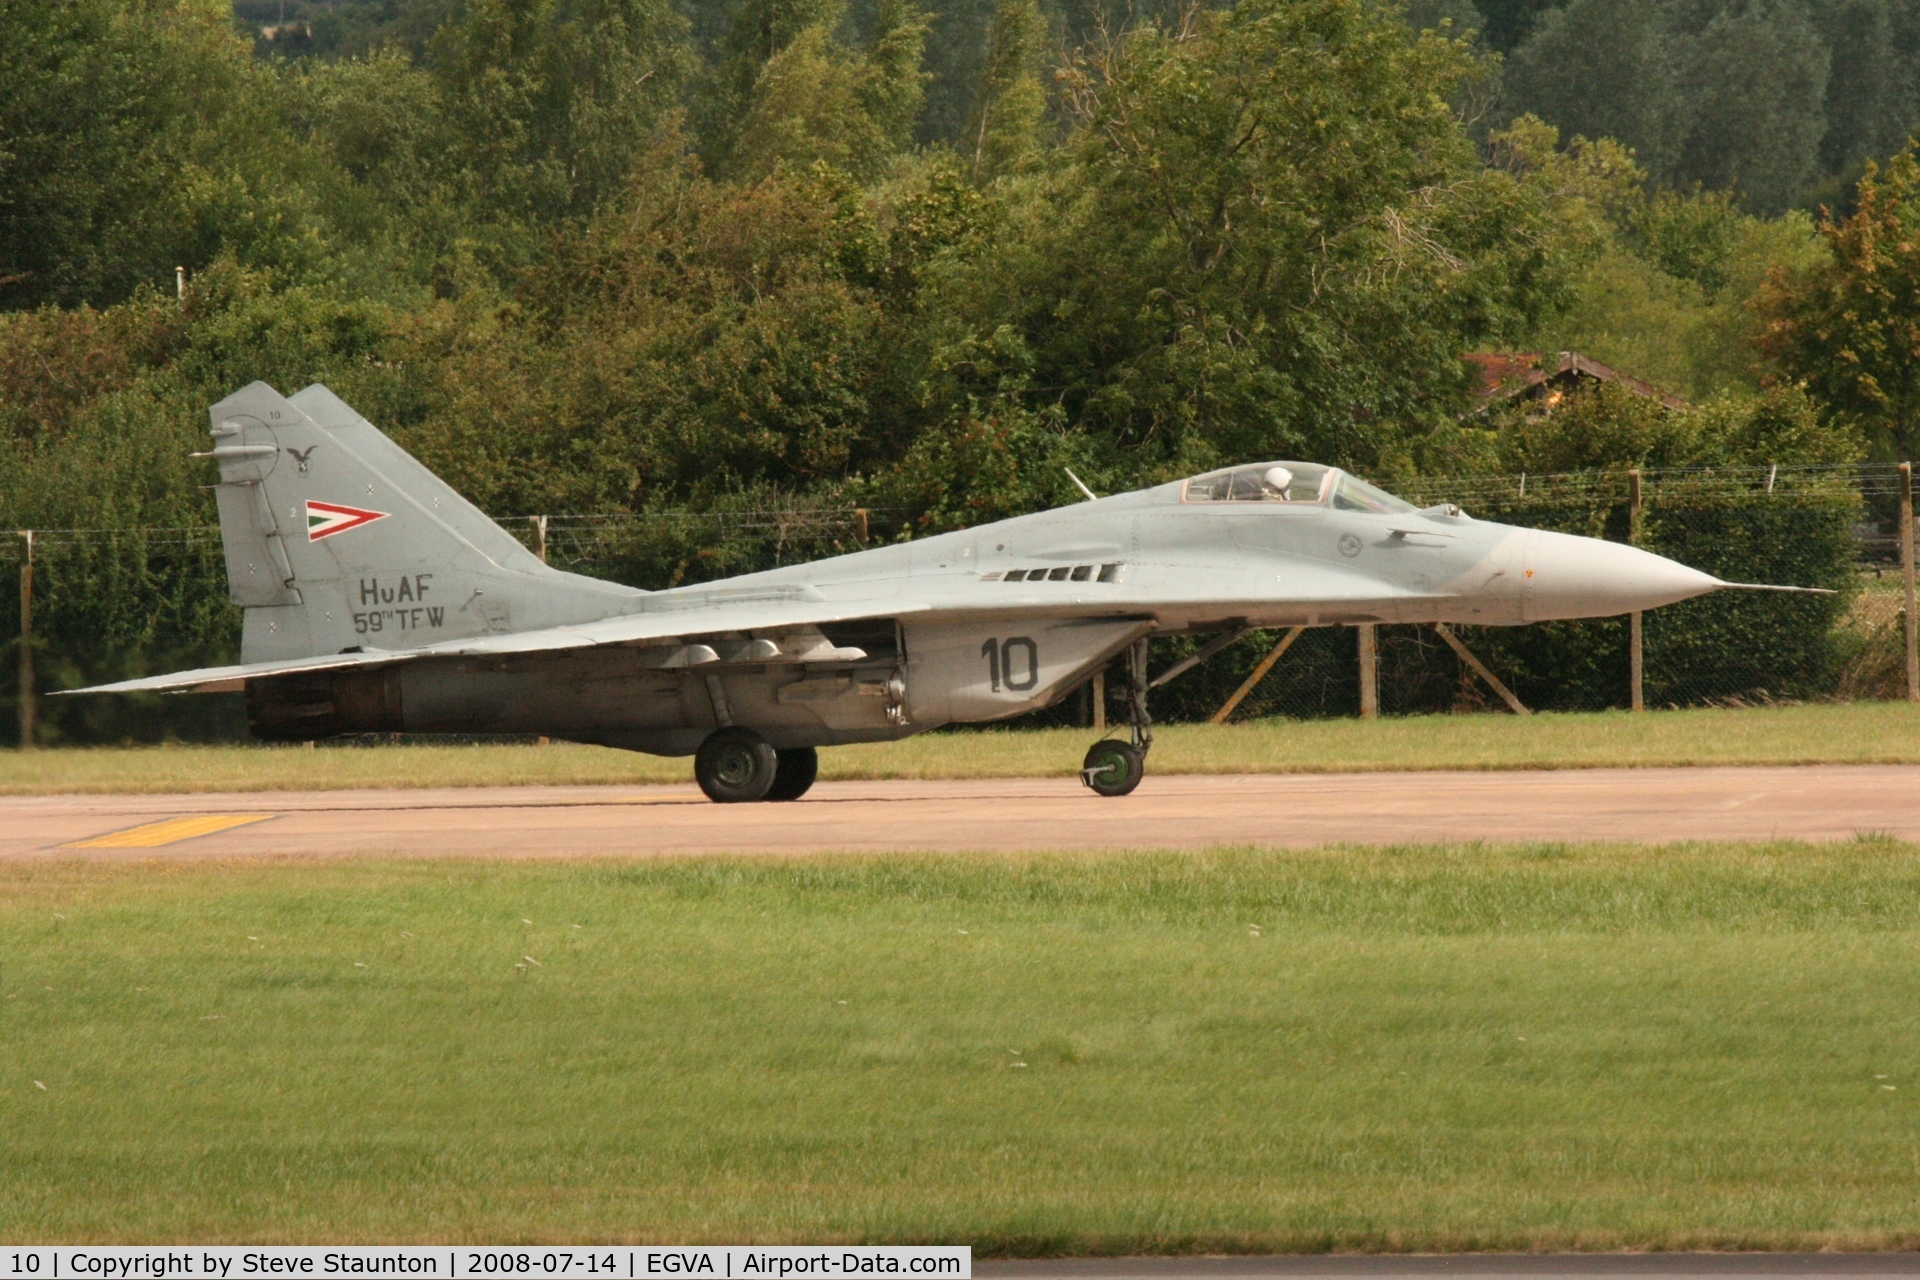 10, Mikoyan-Gurevich MiG-29B C/N 2960535158, Taken at the Royal International Air Tattoo 2008 during arrivals and departures (show days cancelled due to bad weather)